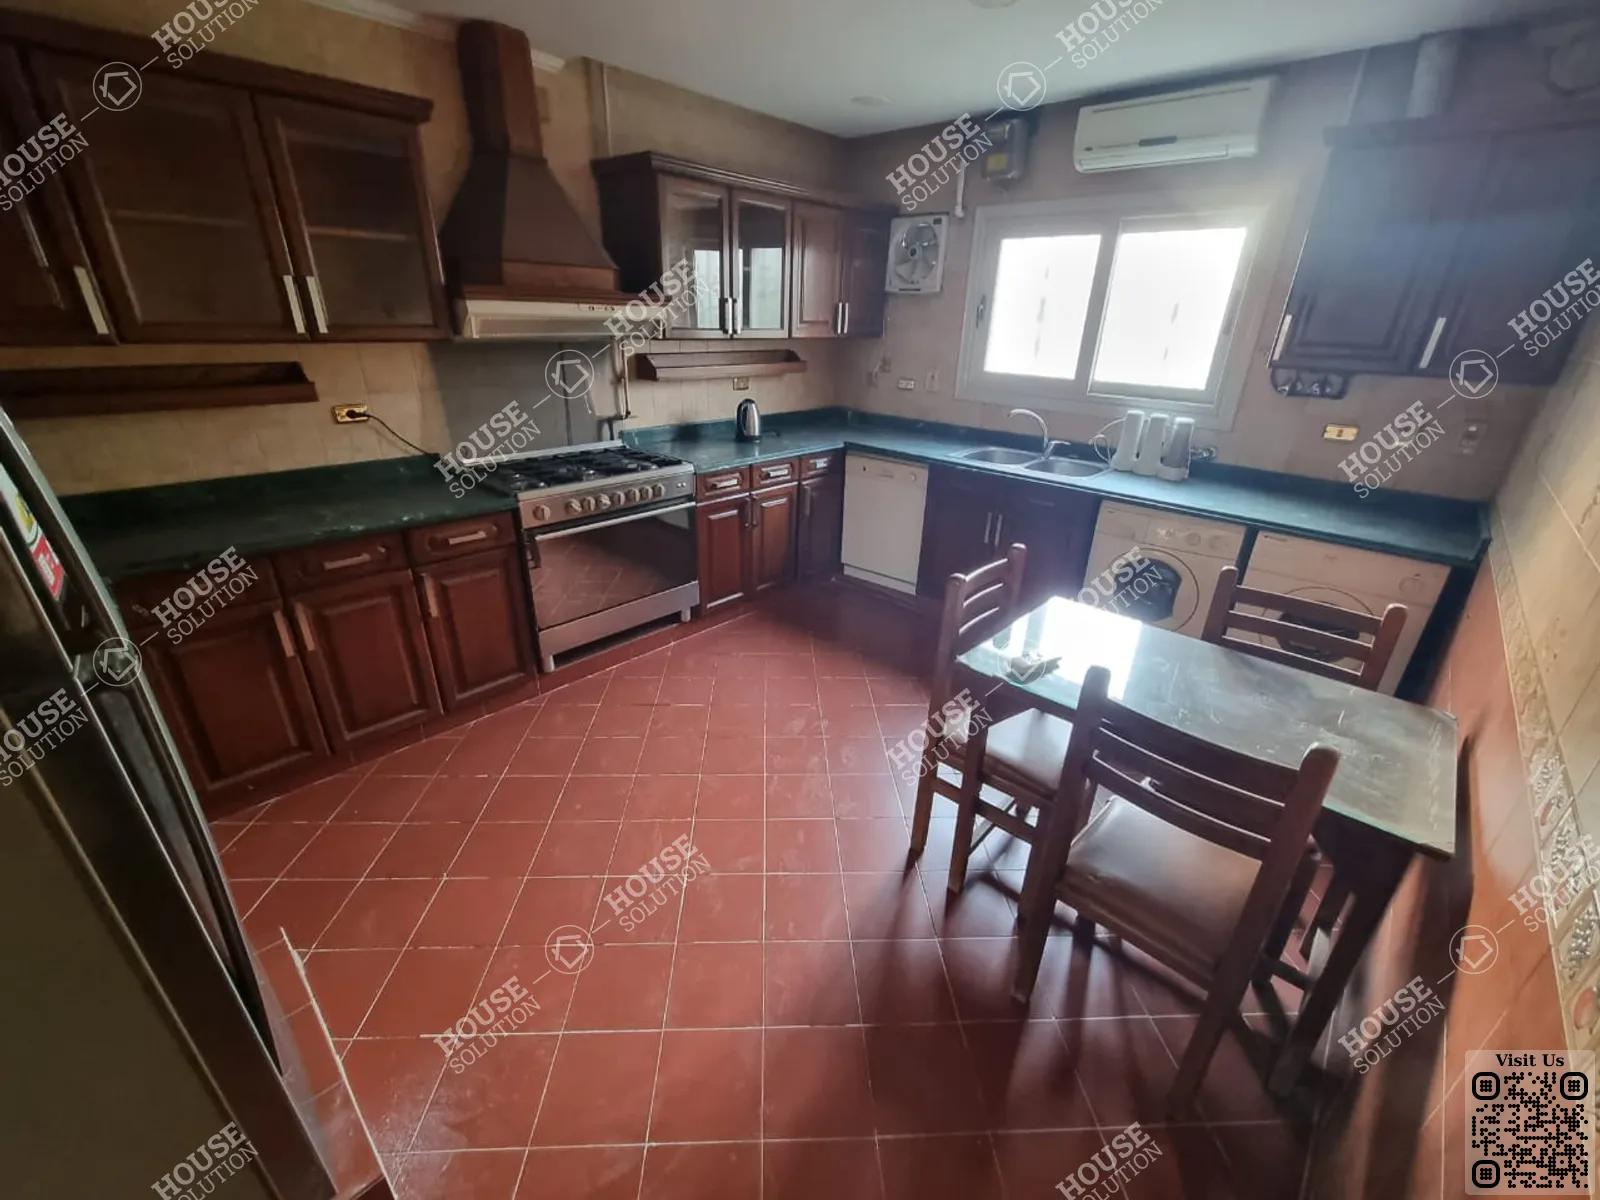 KITCHEN  @ Apartments For Rent In Maadi Maadi Degla Area: 230 m² consists of 3 Bedrooms 3 Bathrooms Furnished 5 stars #4946-2